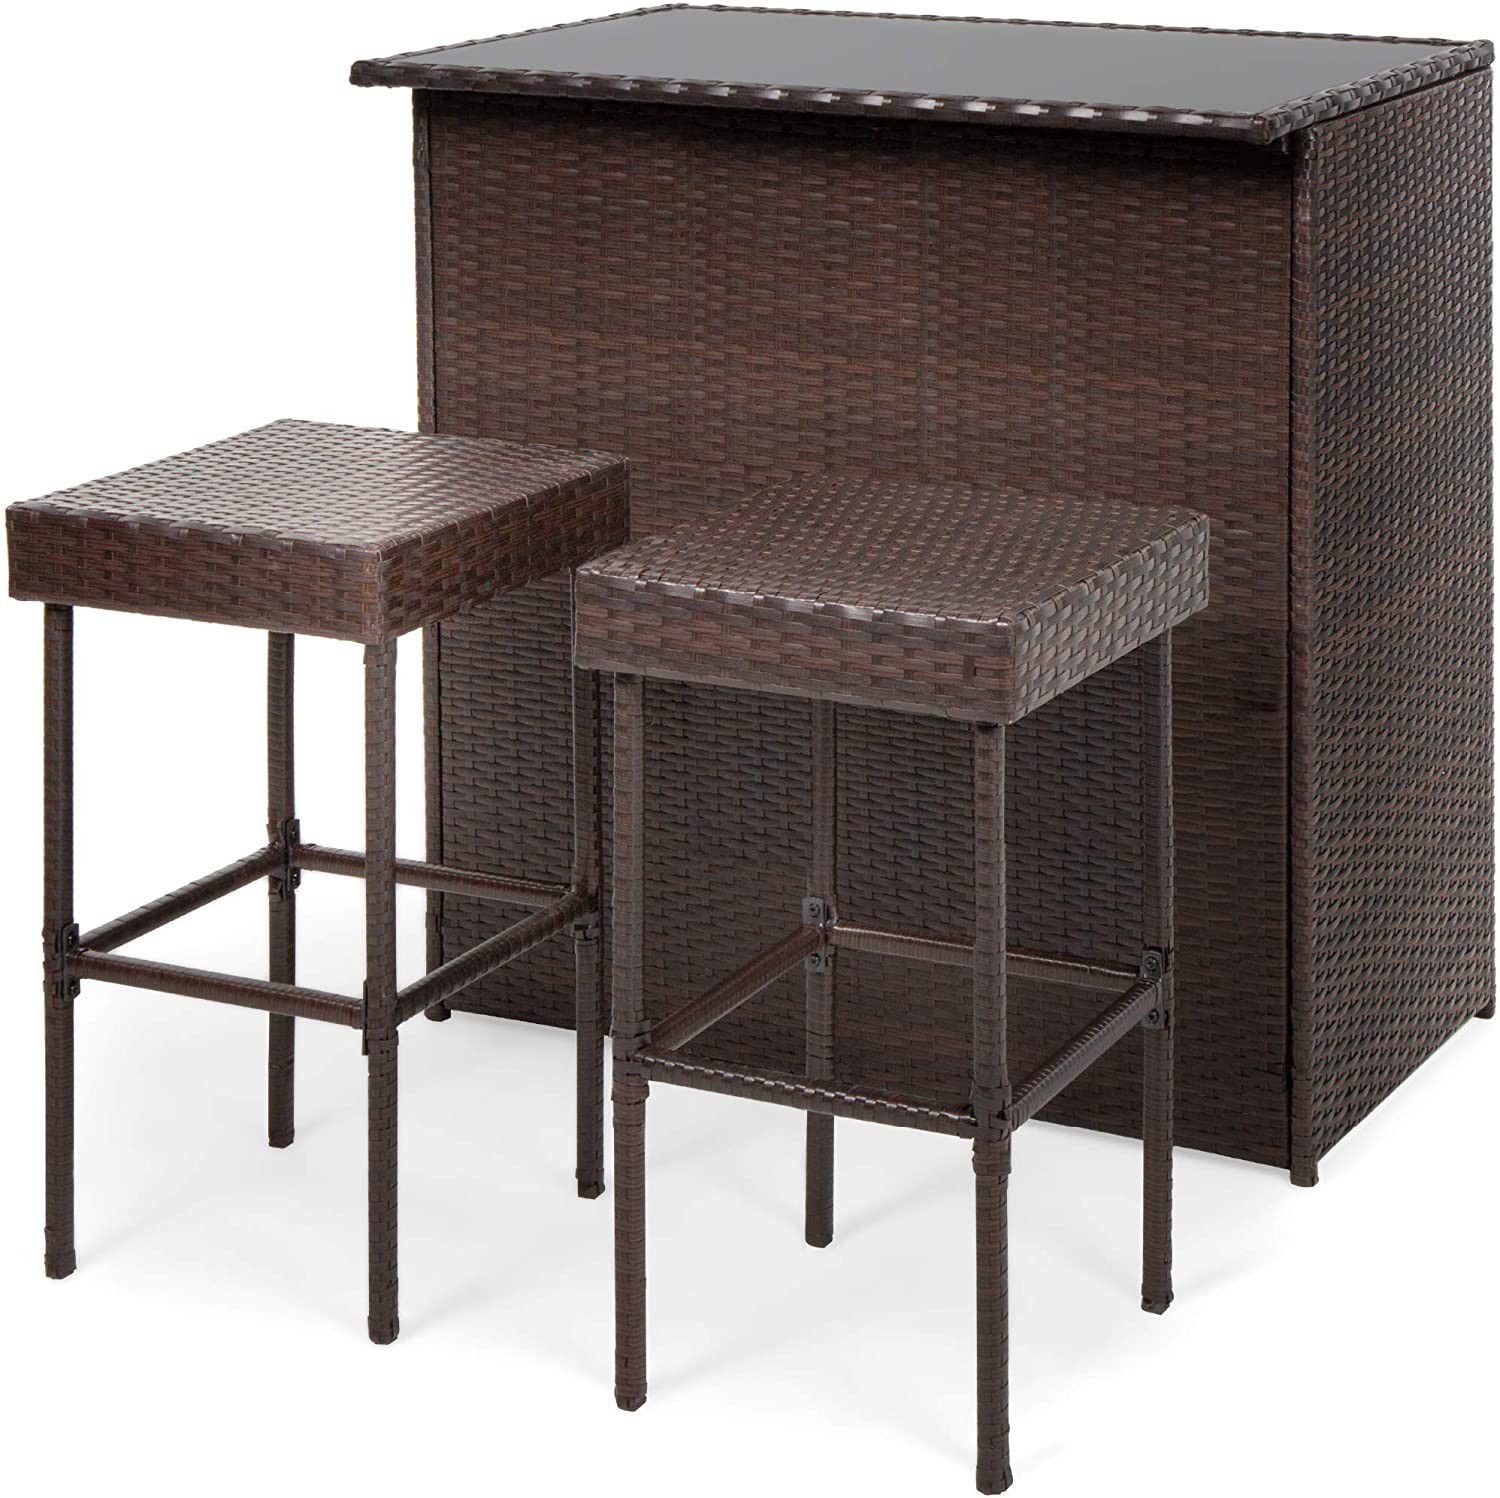 Set of 3 - Wicker Bar Table Set with 2 Stools, Glass Tabletop, Brown